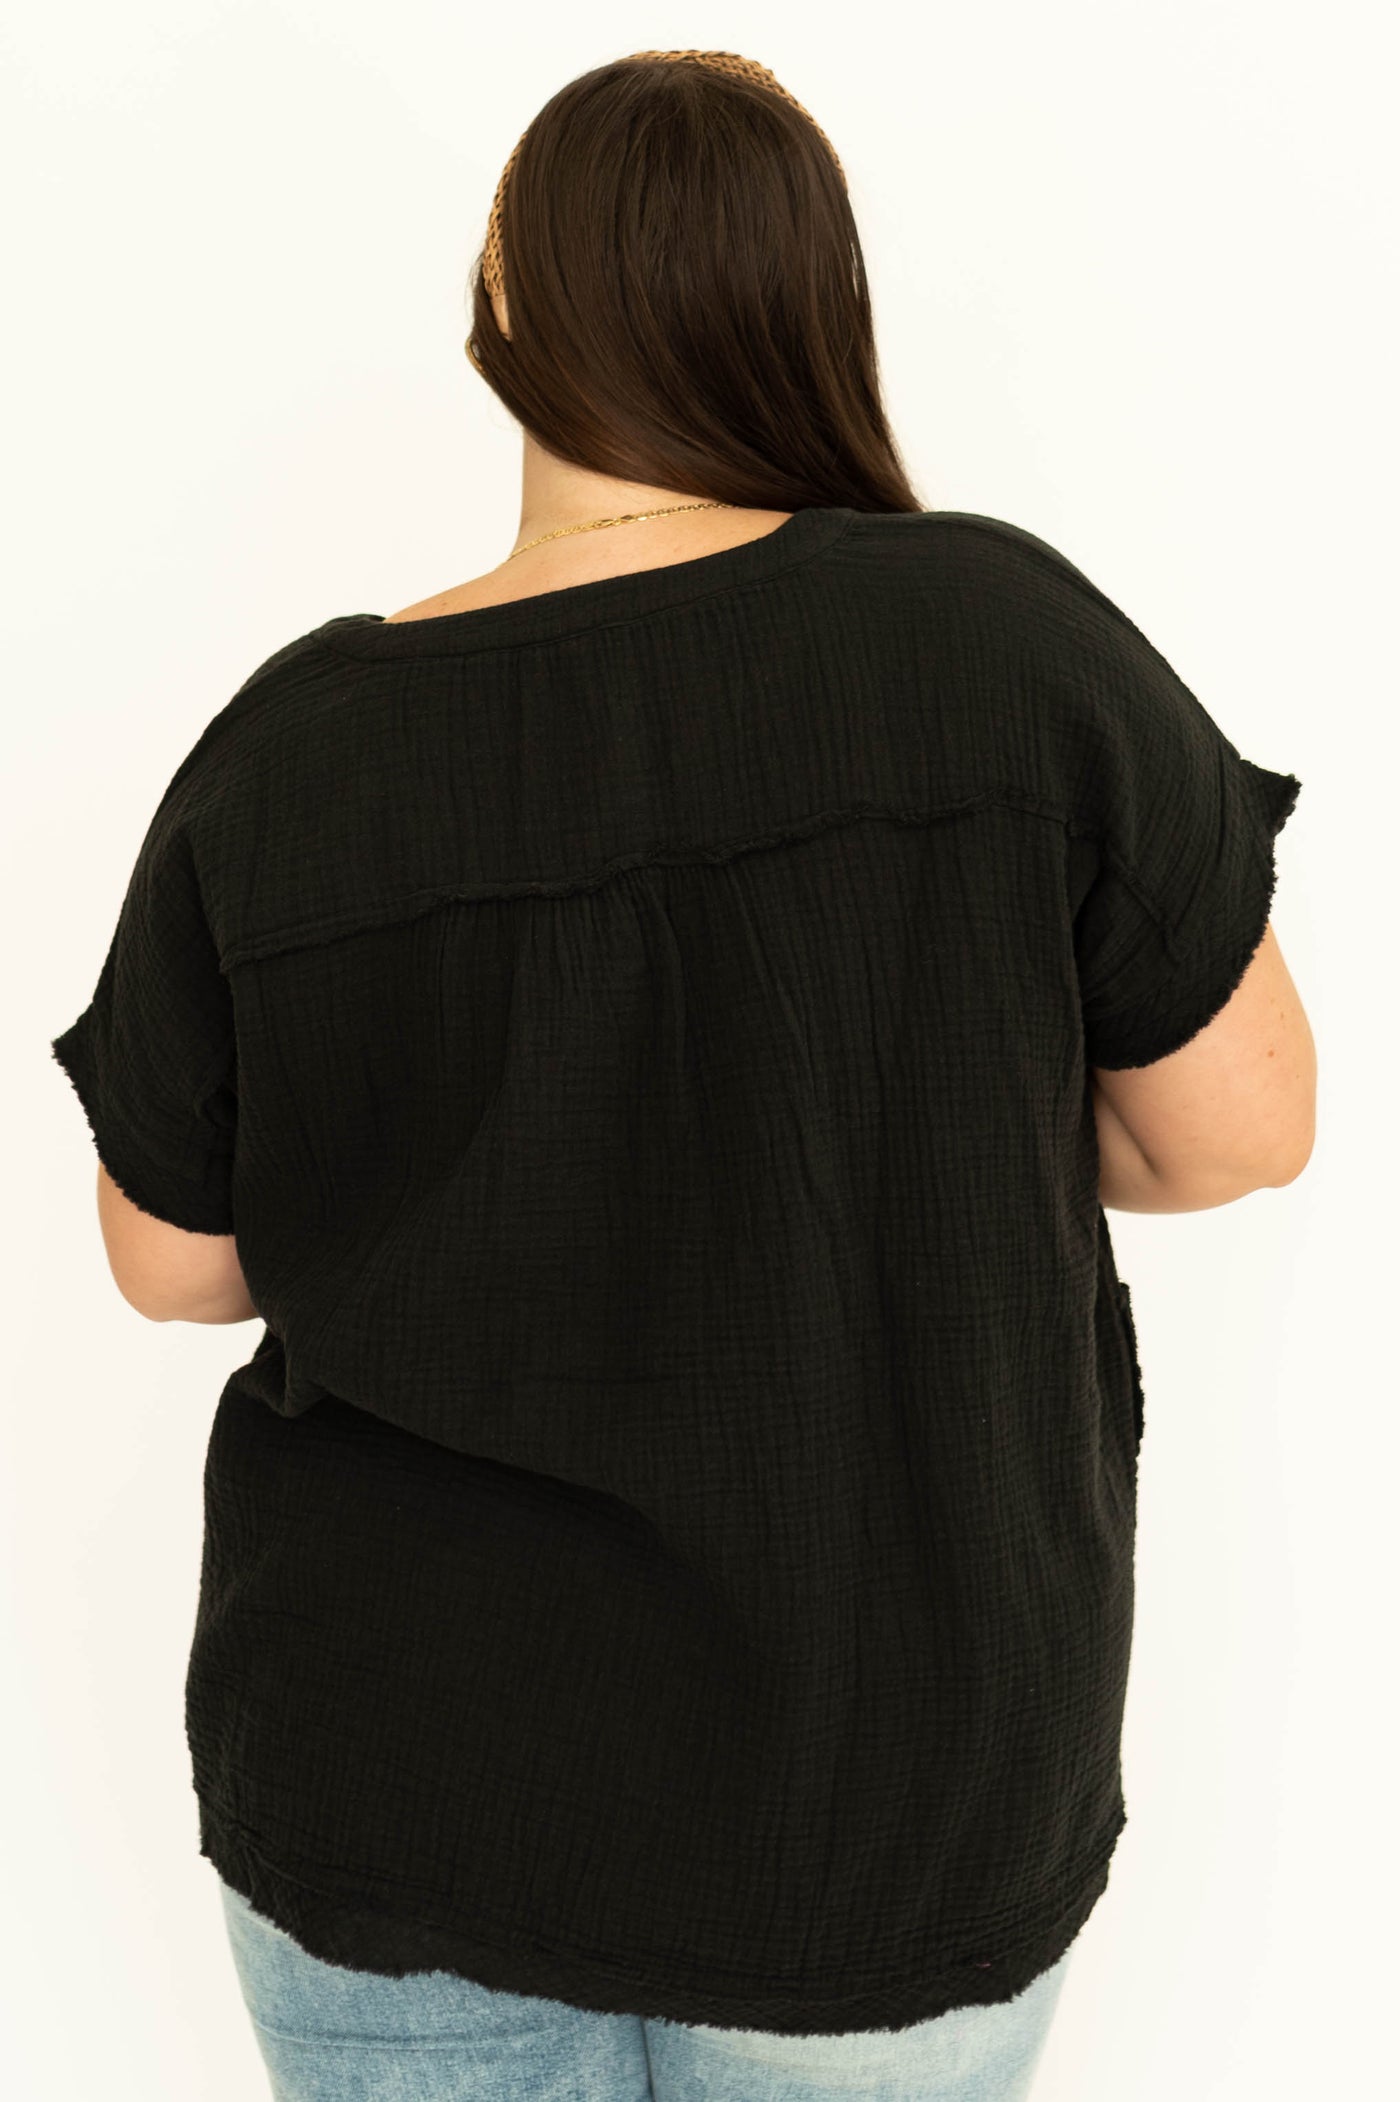 Back view of a black top